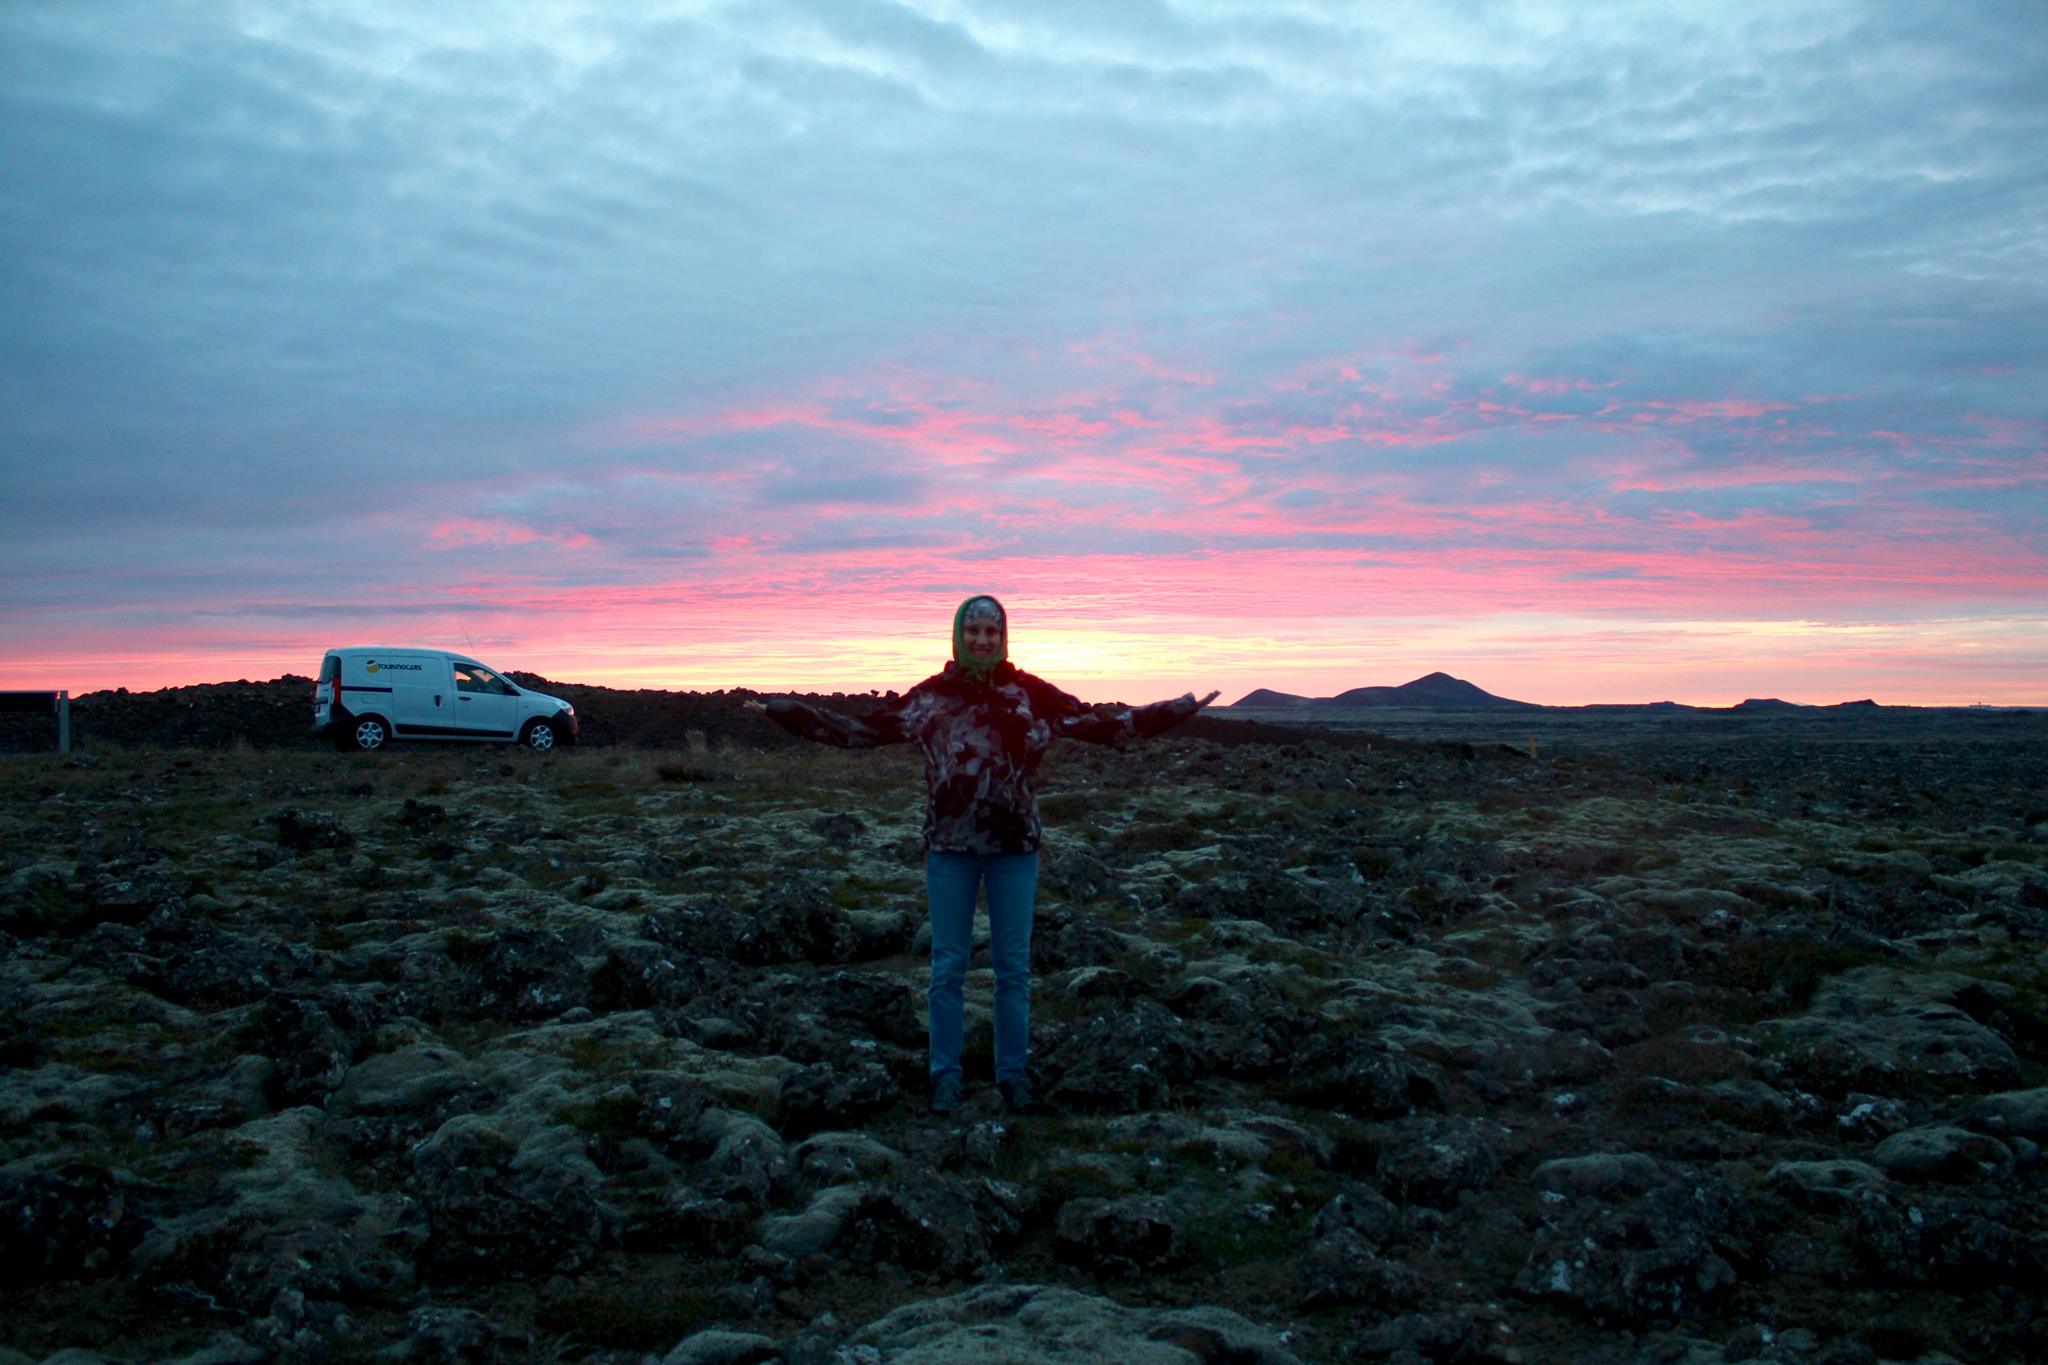 Kathi enjoying the sunrise next to the lava fields where we slept in our van for the first time